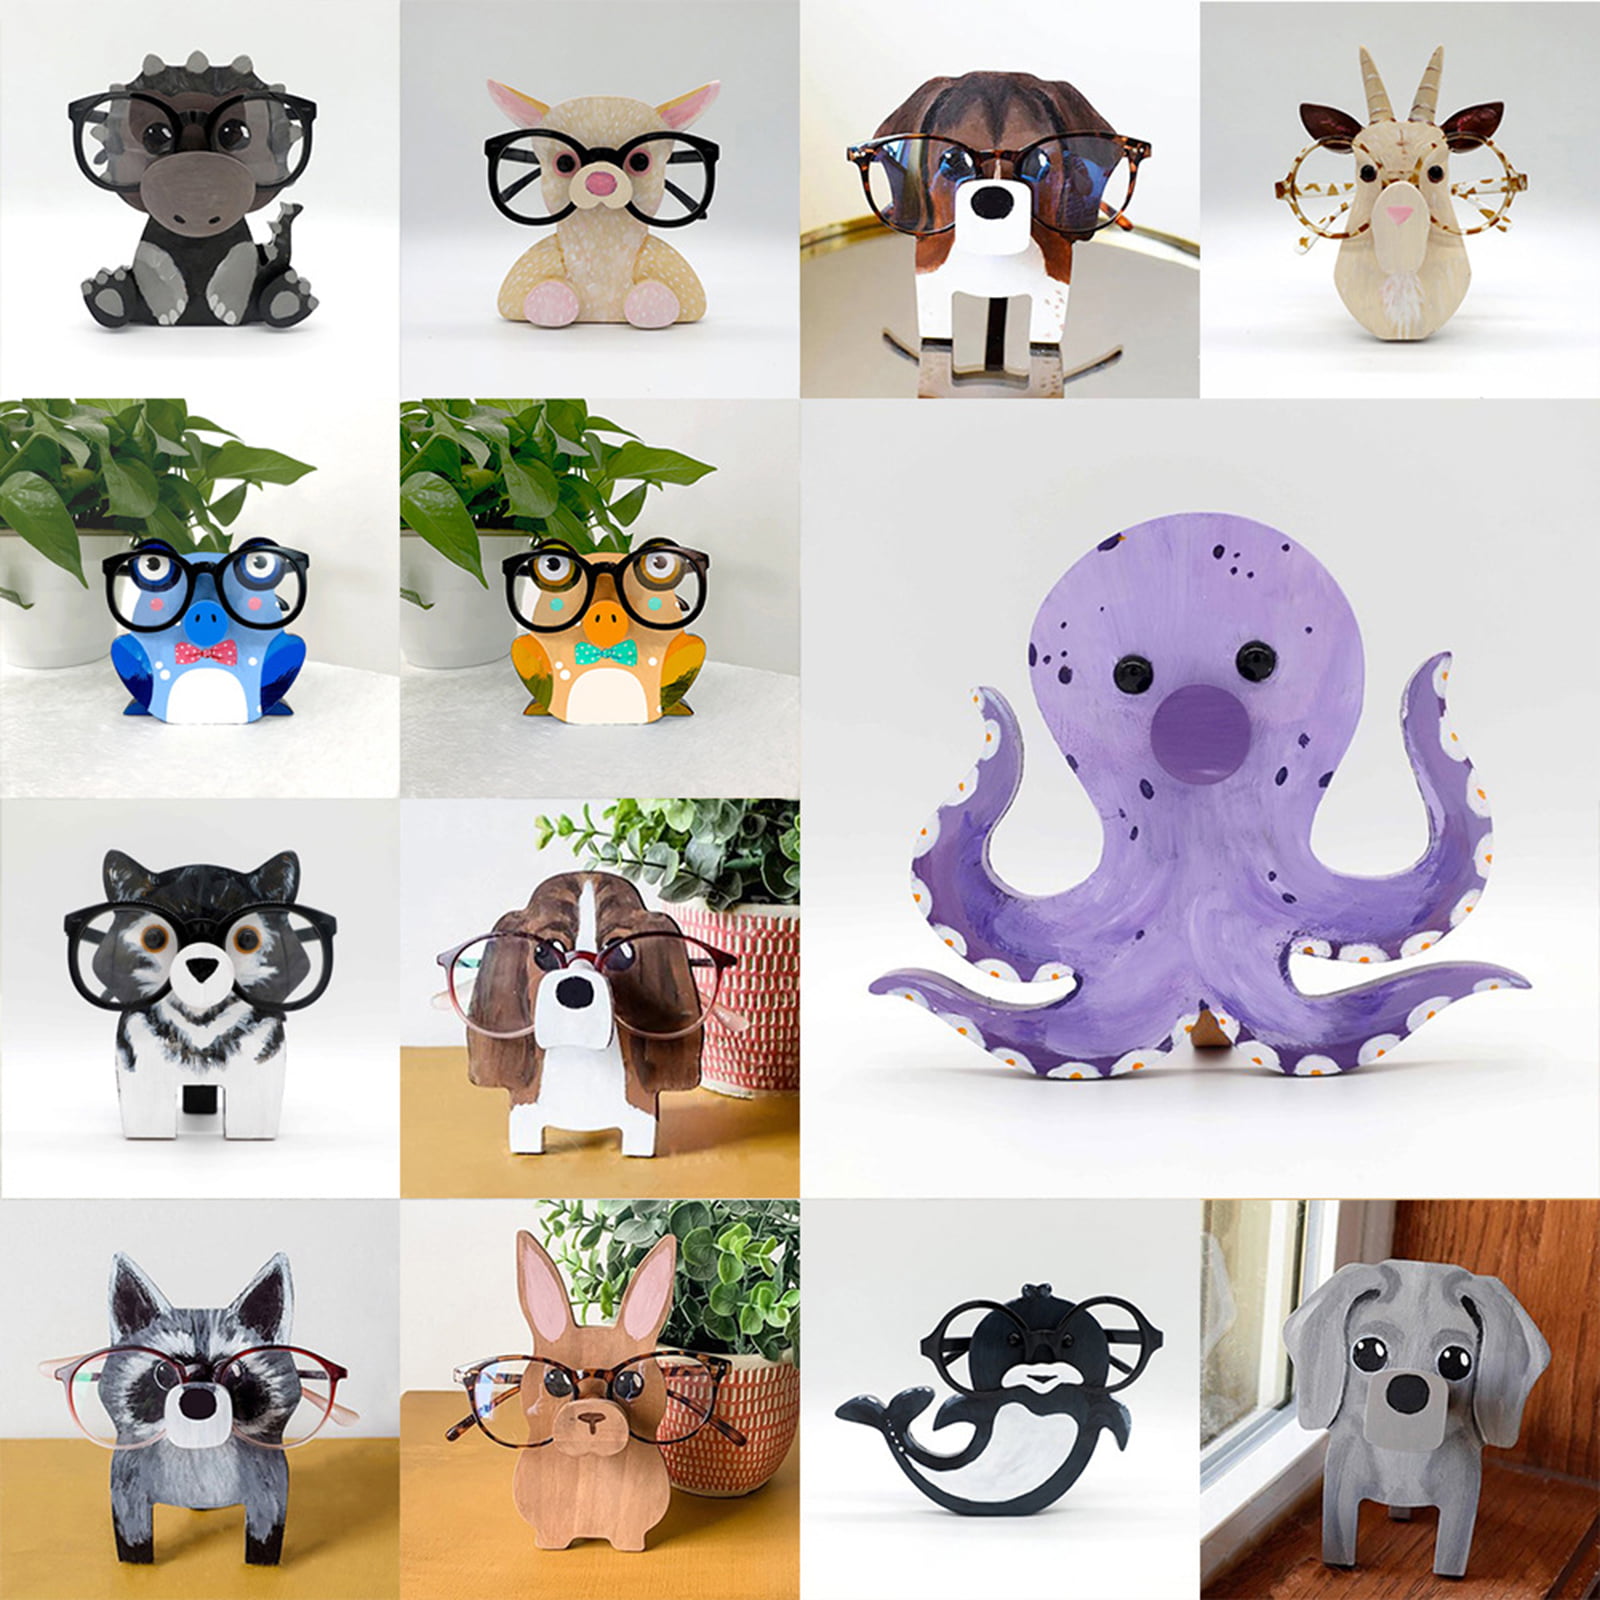 YGAOR Glasses Holder Stand Animal Wooden Eyeglass Holder Stand Cute Animal  Pet Glasses Stand Holder Cat Handmade Wood Animal Shape Eye Glass Holder